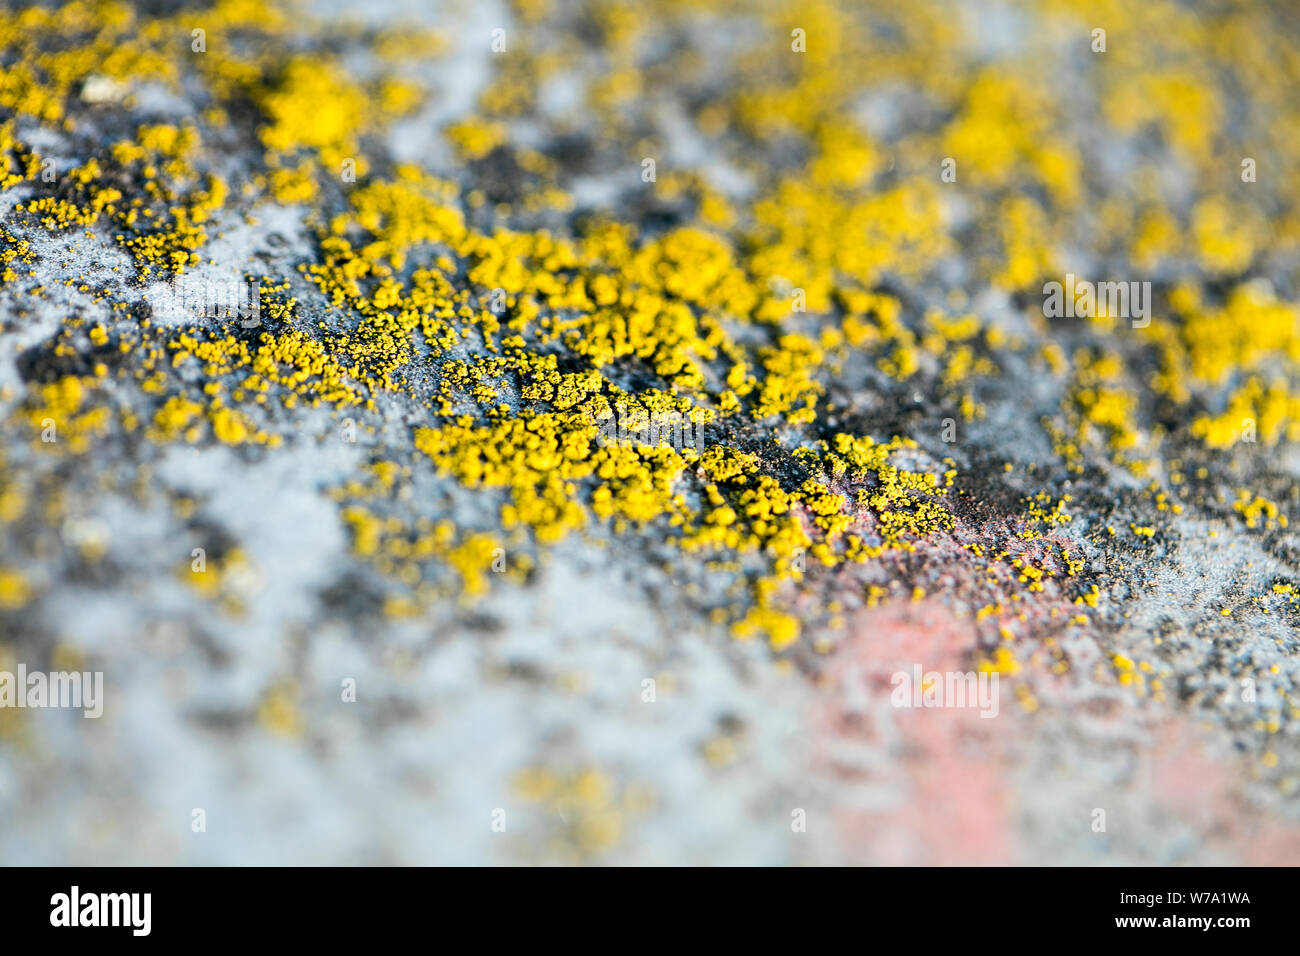 Yellow lichens on metal surface macro background fine art high quality prints products fifty megapixels Stock Photo